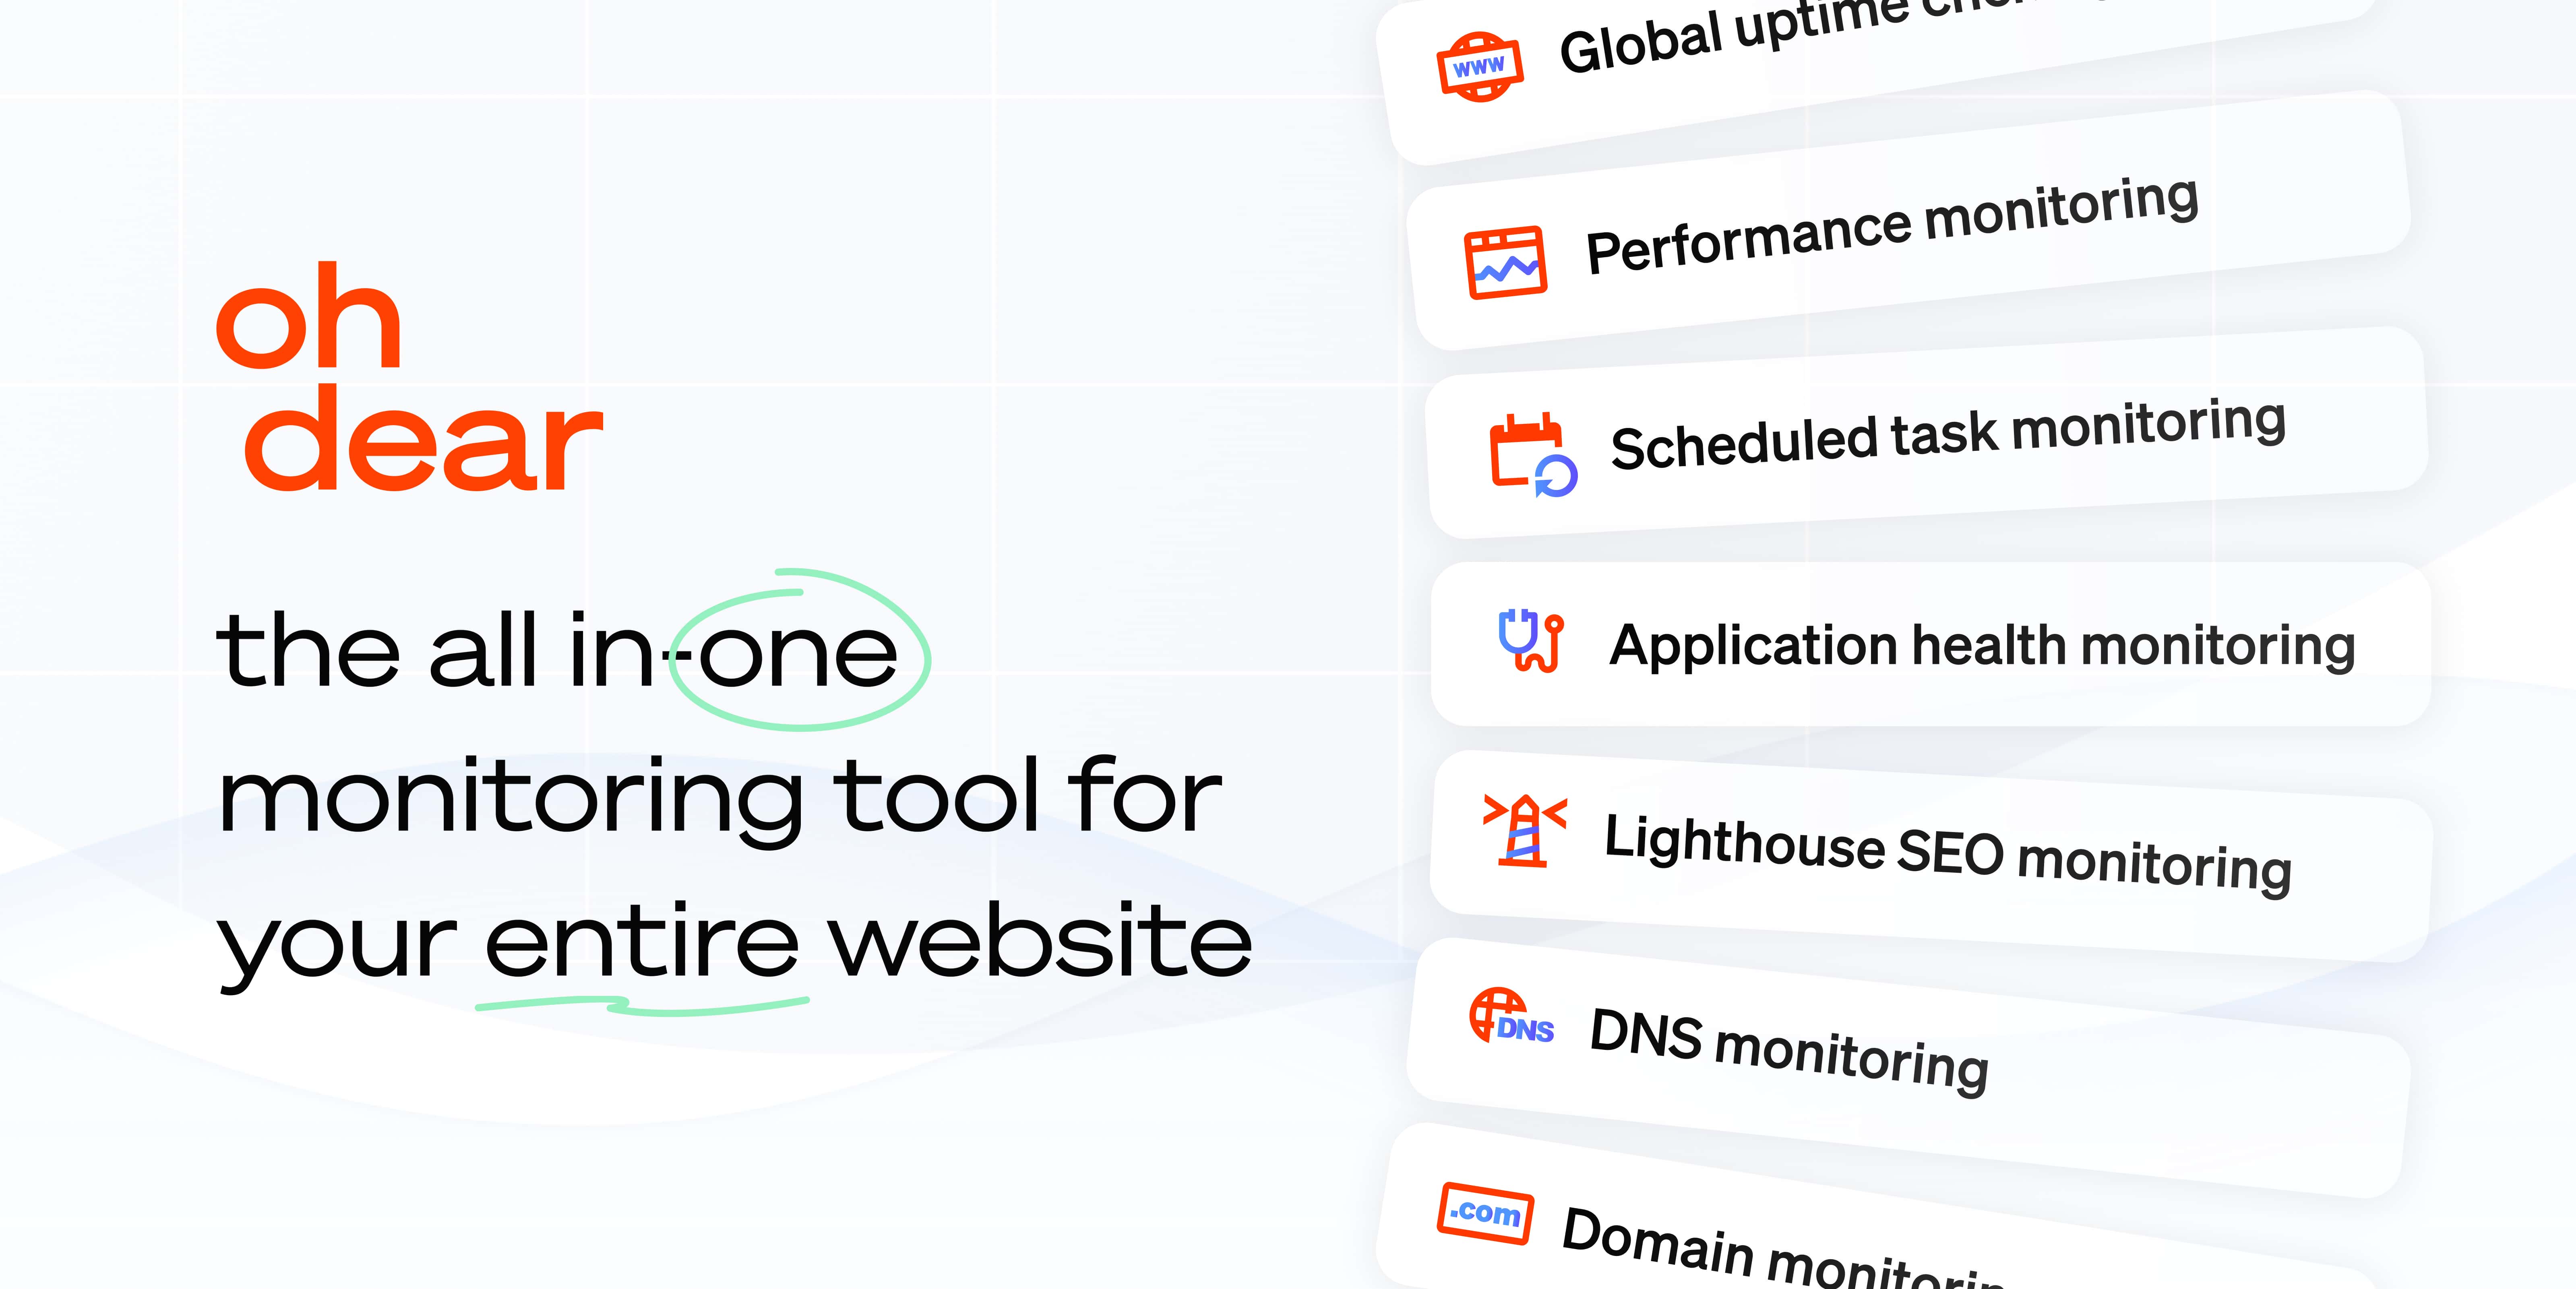 All in one monitoring tool for your entire website